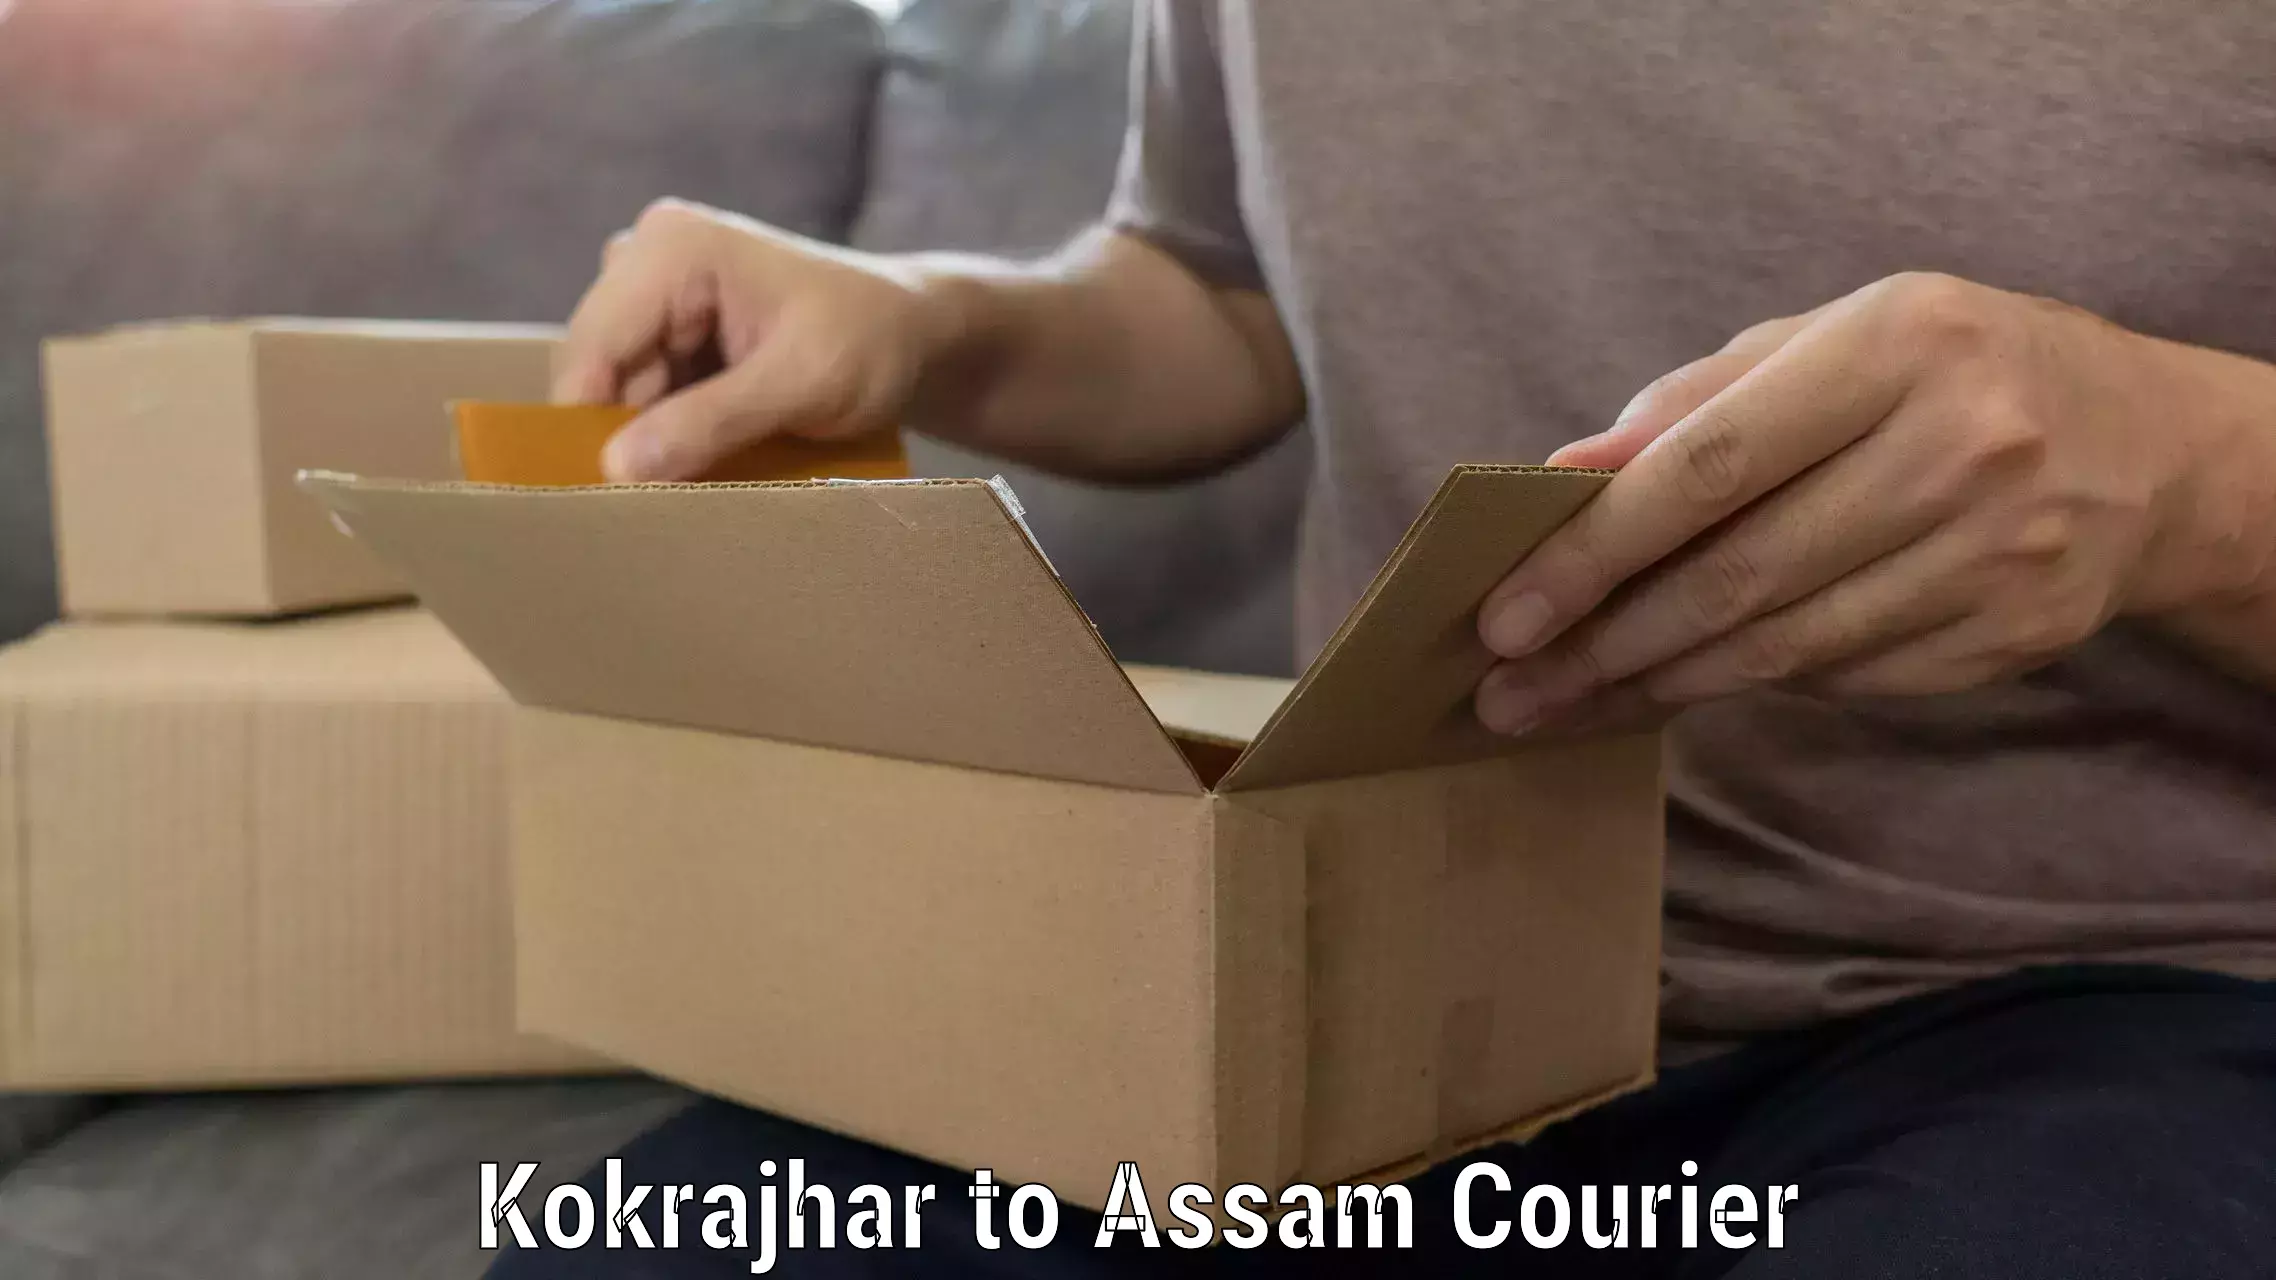 Expert packing and moving Kokrajhar to Jorhat